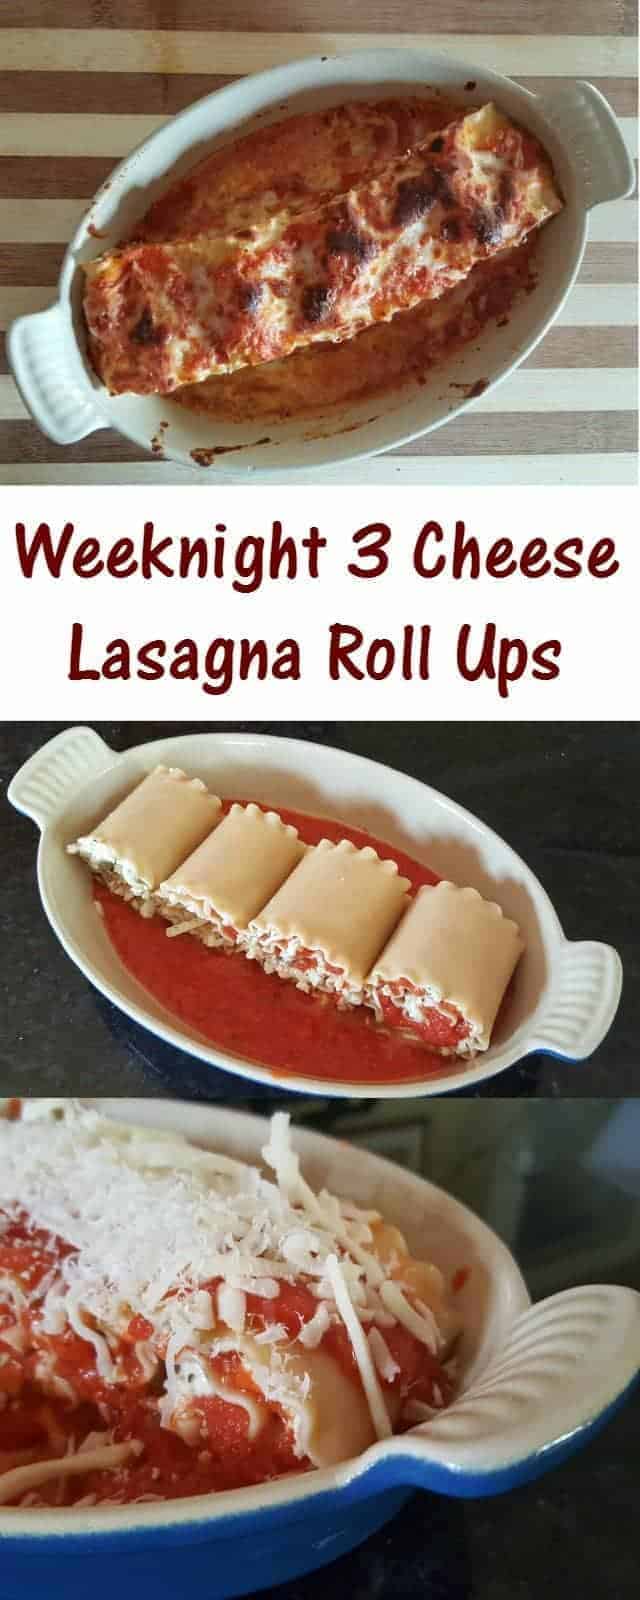 Weeknight 3 cheese lasagna roll ups recipe for a delicious and easy Italian dinner. Prep it ahead for busy nights, and have perfect portion control with leftovers